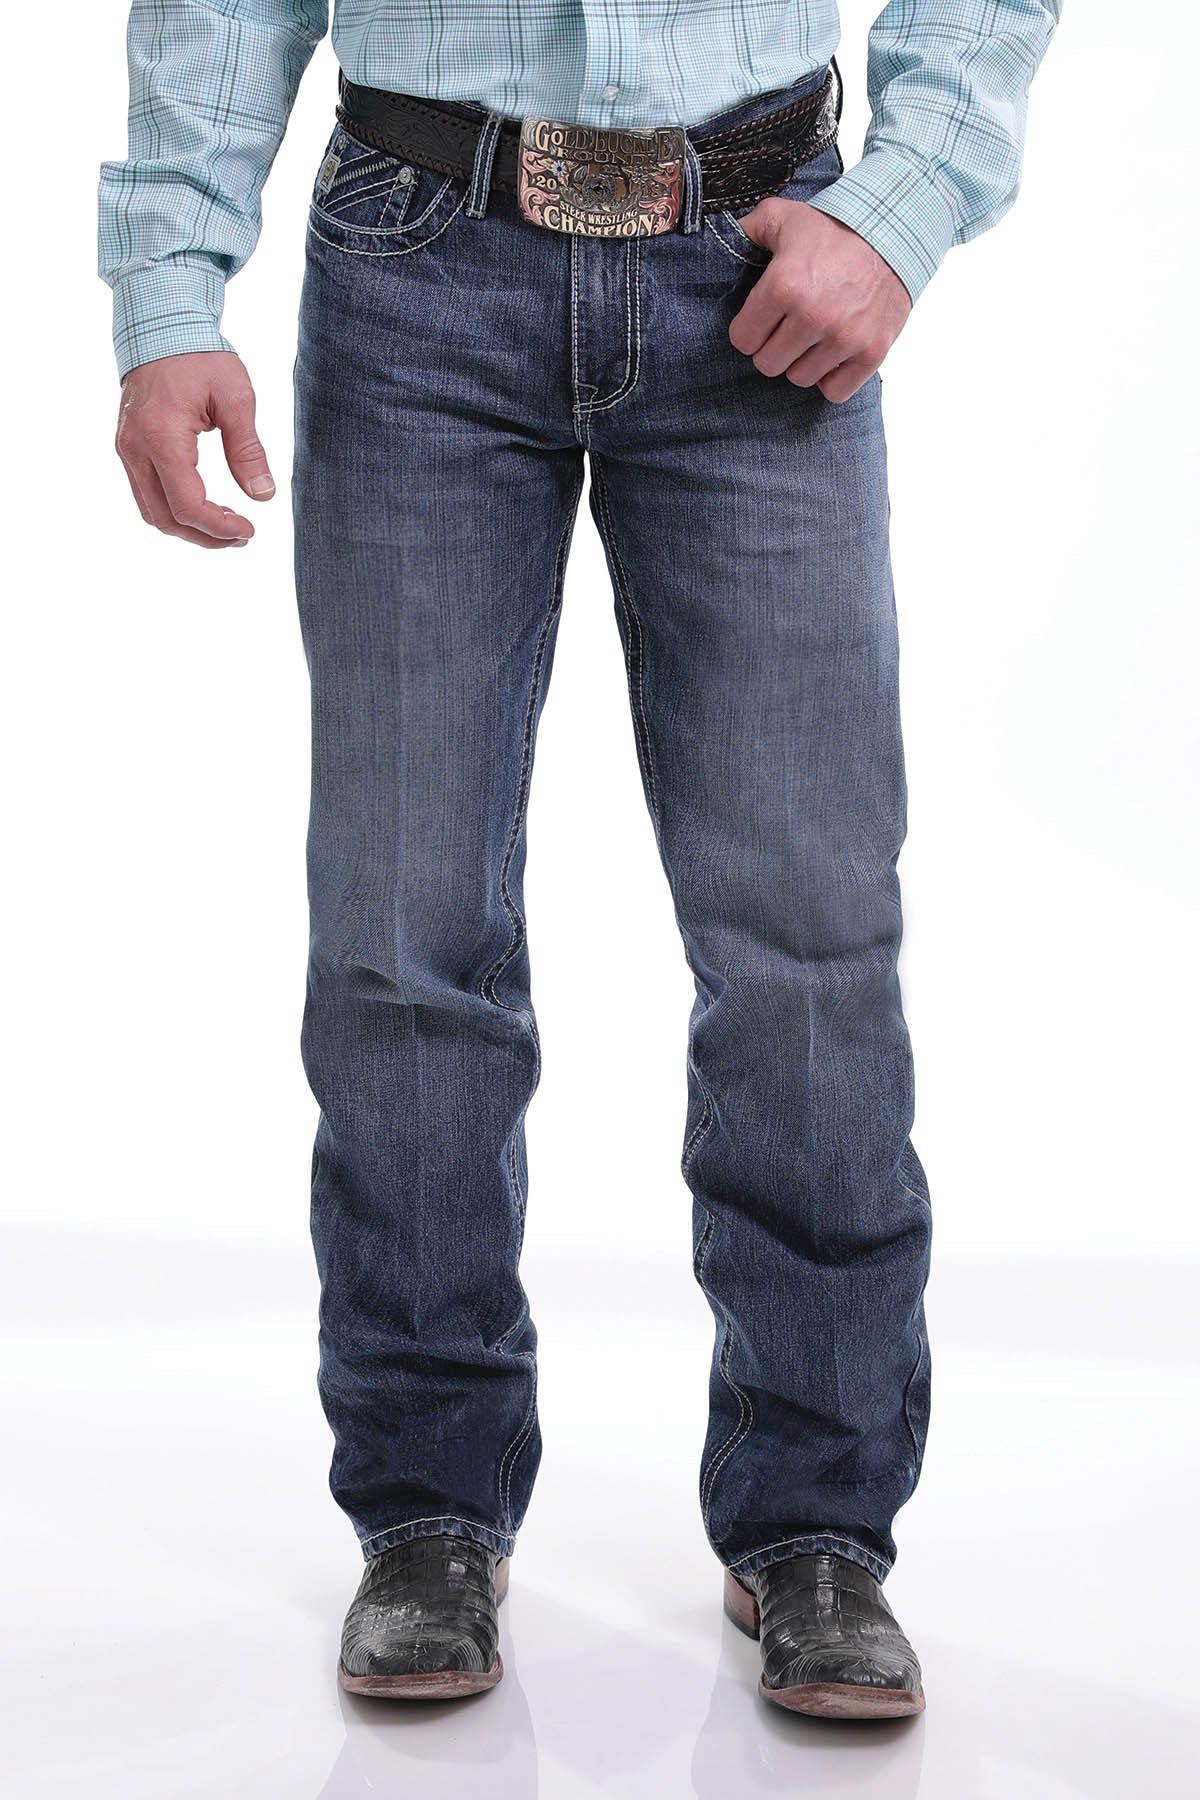 Cinch Men's Relaxed Fit Grant Bootcut Jeans